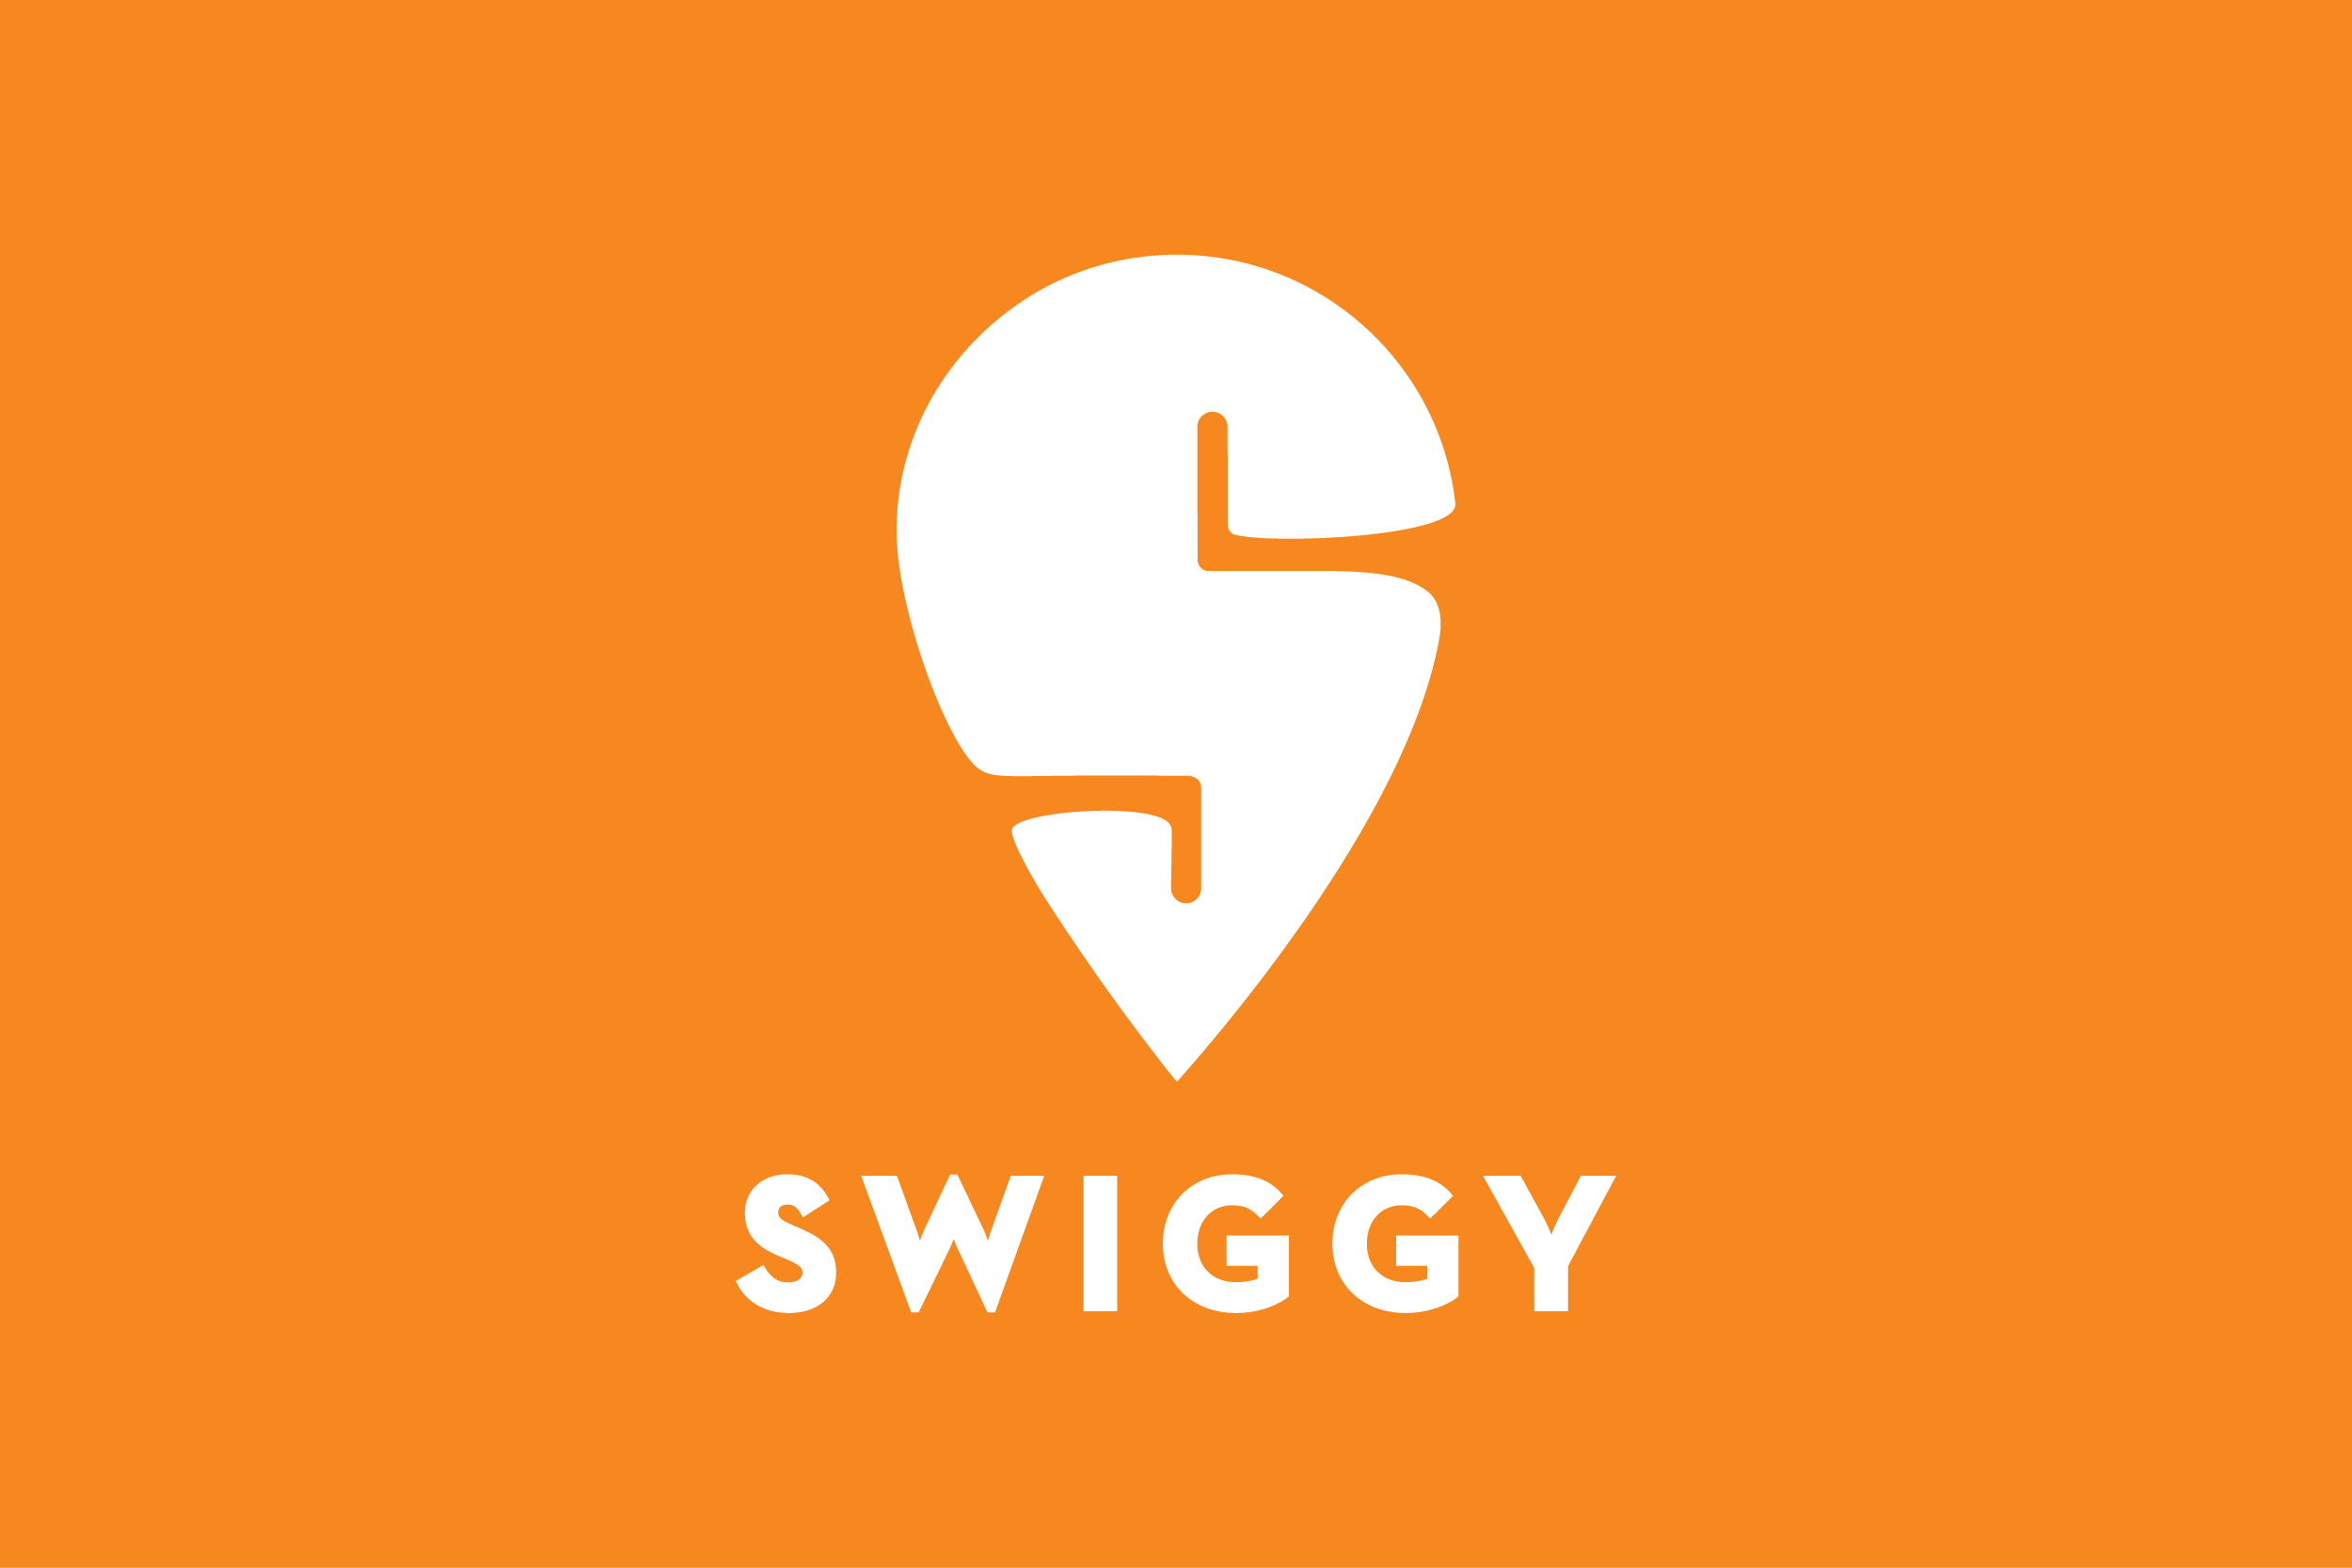 Swiggy denies company fudged numbers as claimed by anonymous blog post ...